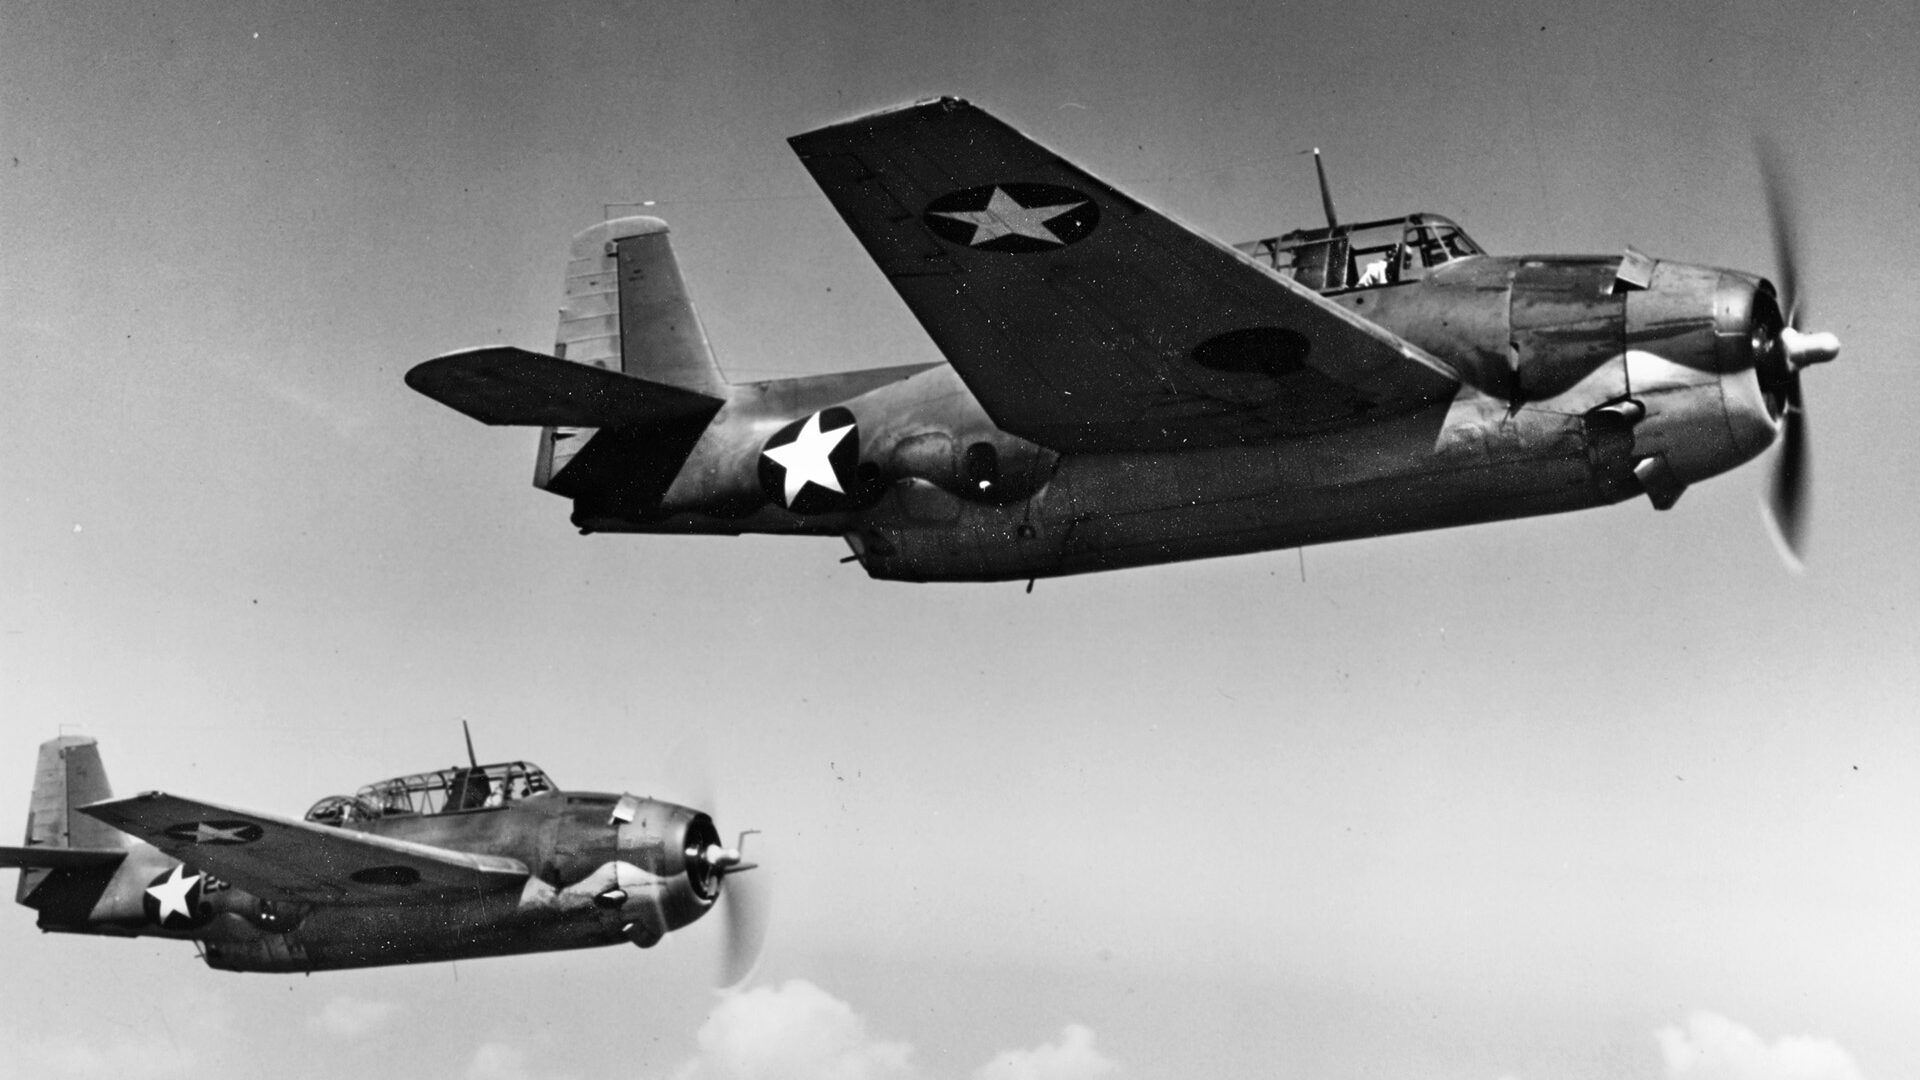 TBF-1 Avenger torpedo bombers (ABOVE) and Grumman F4F Wildcat fighters were the American workhorses during the battle.